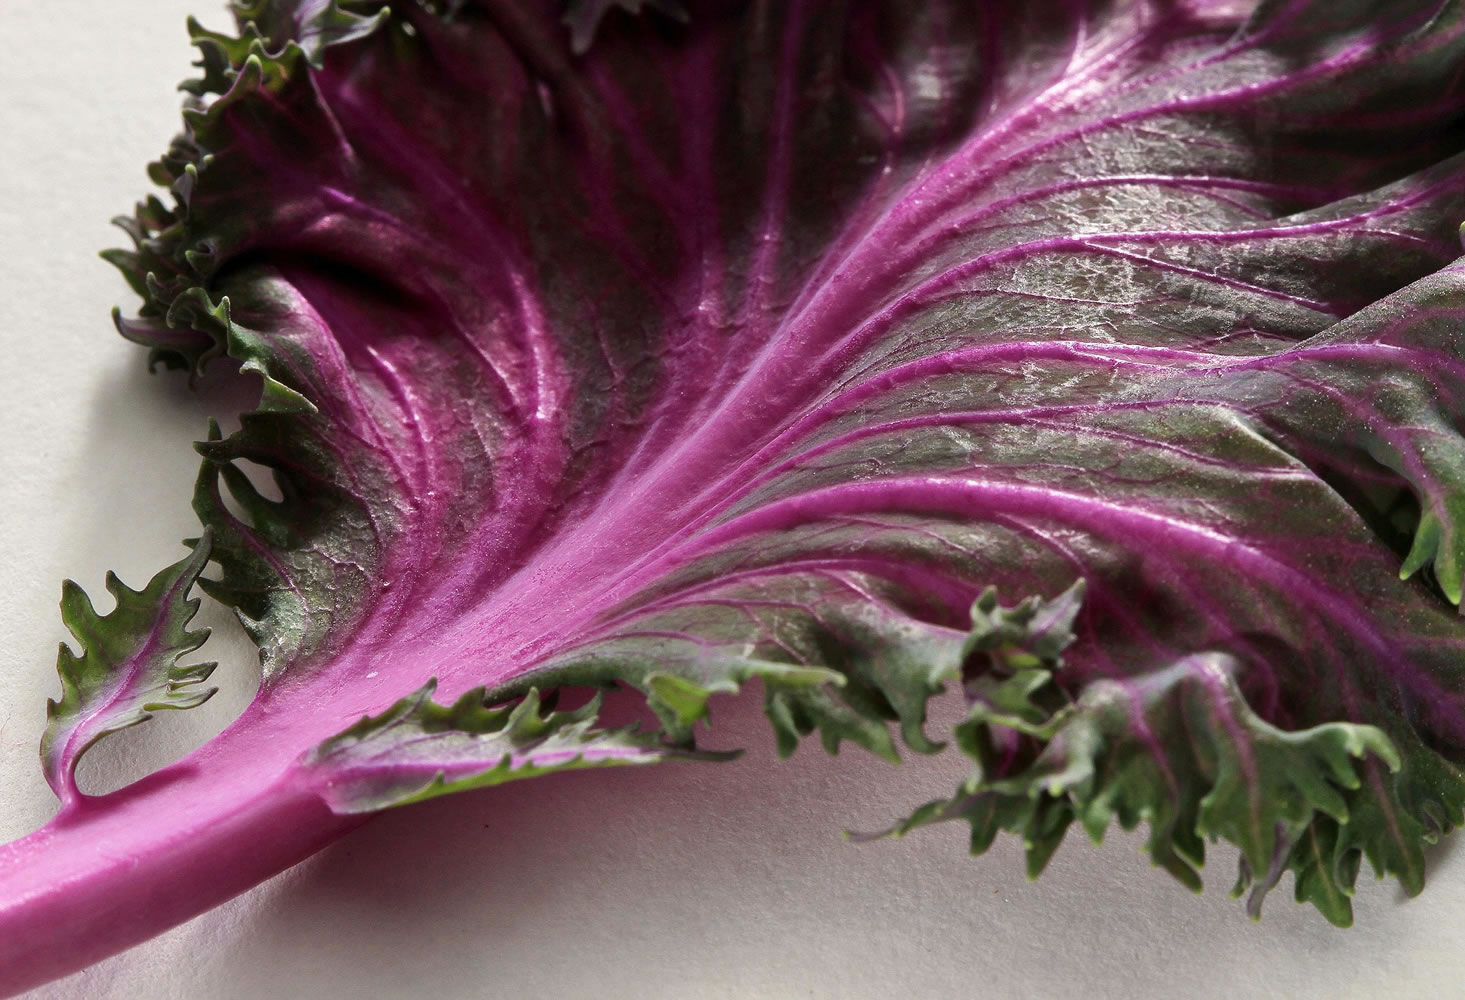 Ornamental kale comes in a variety of colors, and it used in landscaping as well as cooking.